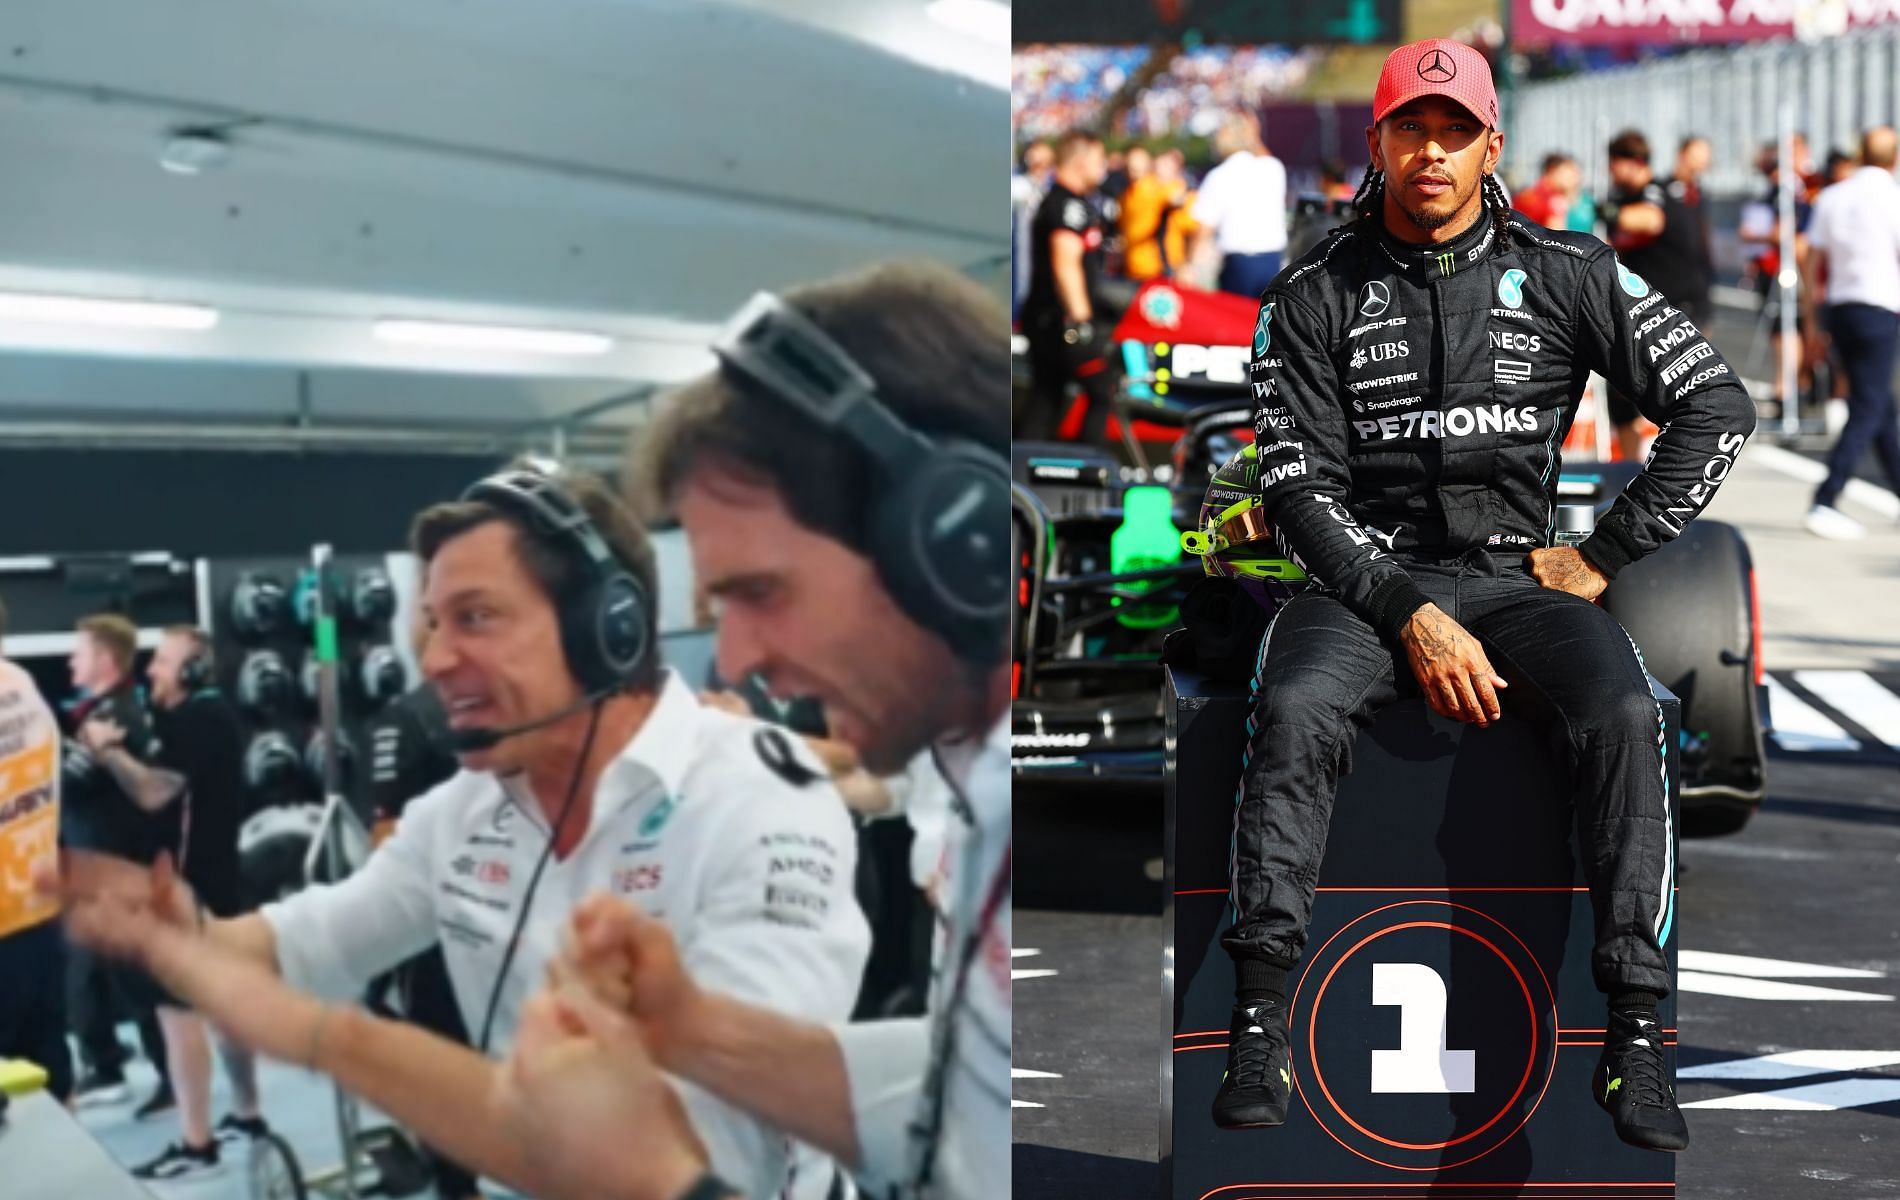 The Mercedes garage erupts as Lewis Hamilton takes his 104th pole position. Both images taken from Twitter. 